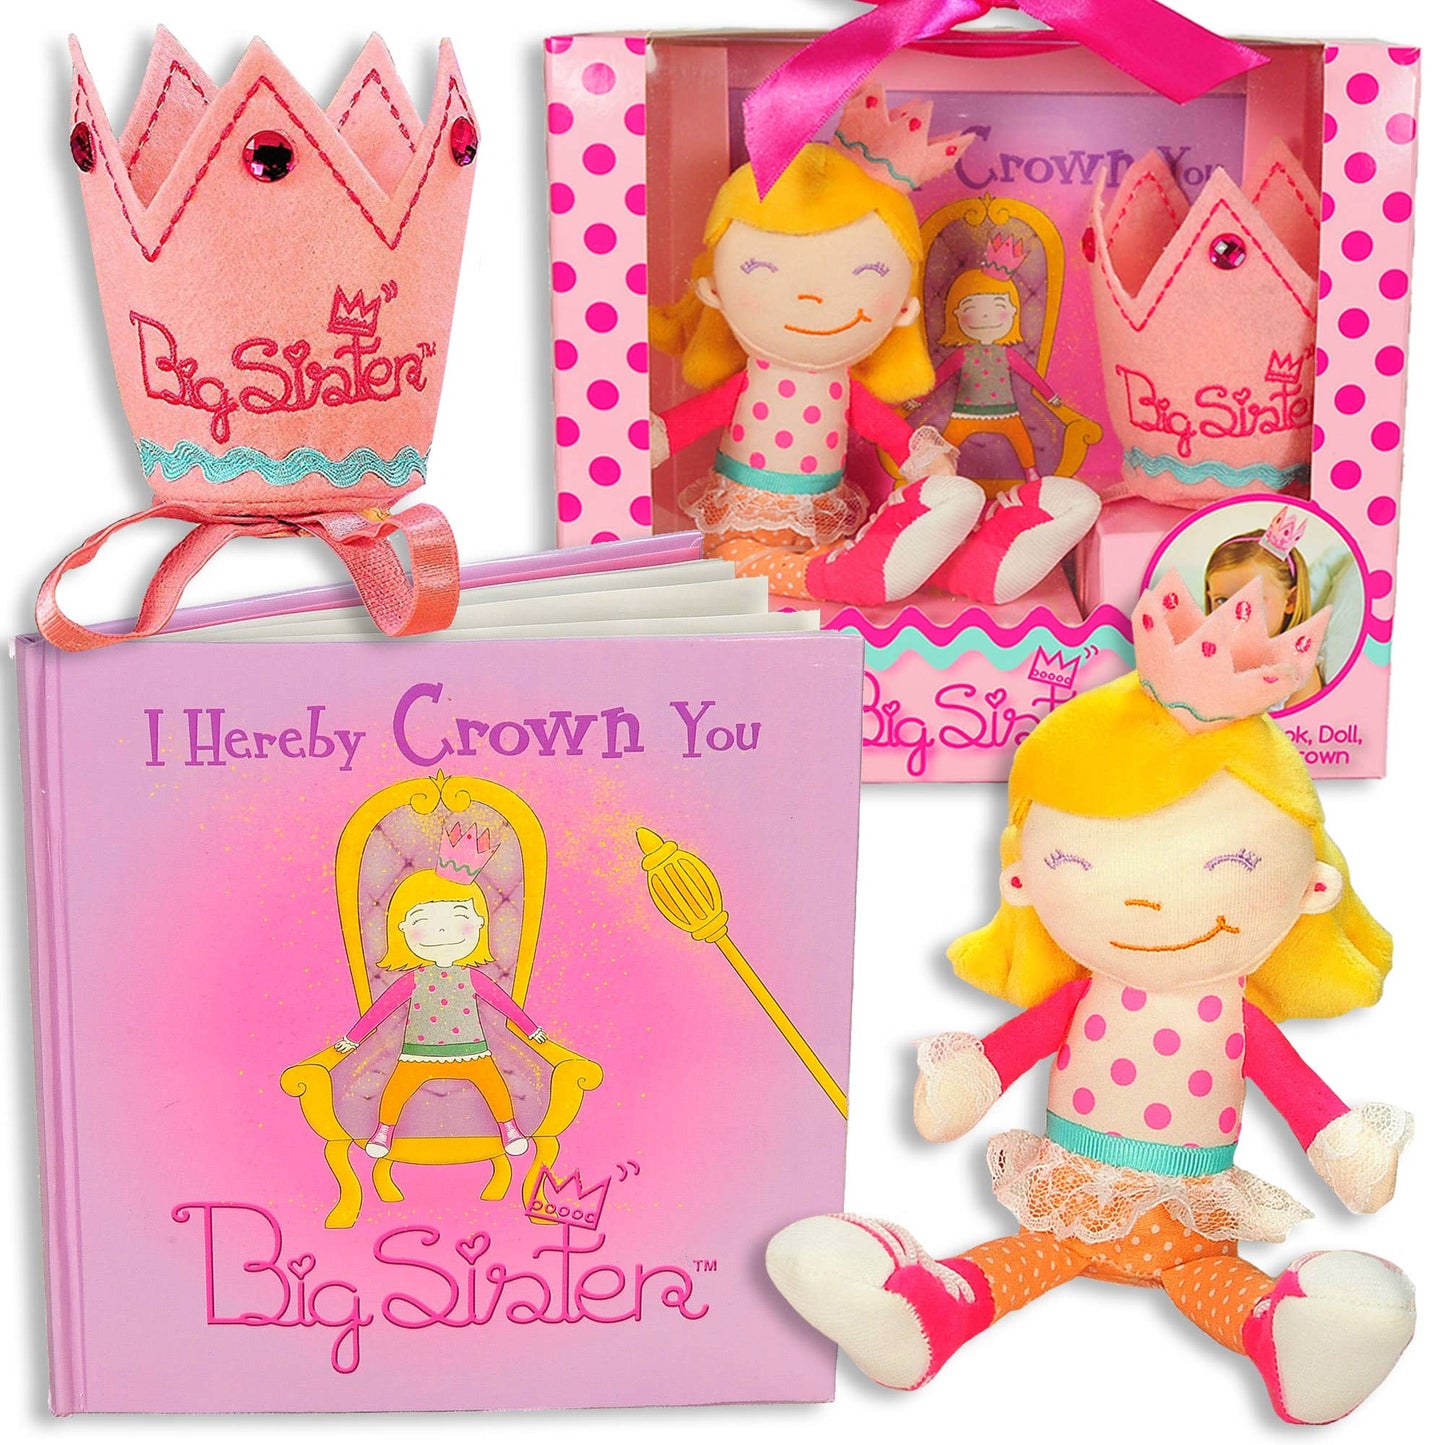 Big Sister Gift Set w/ Book, Plush Doll and Crown